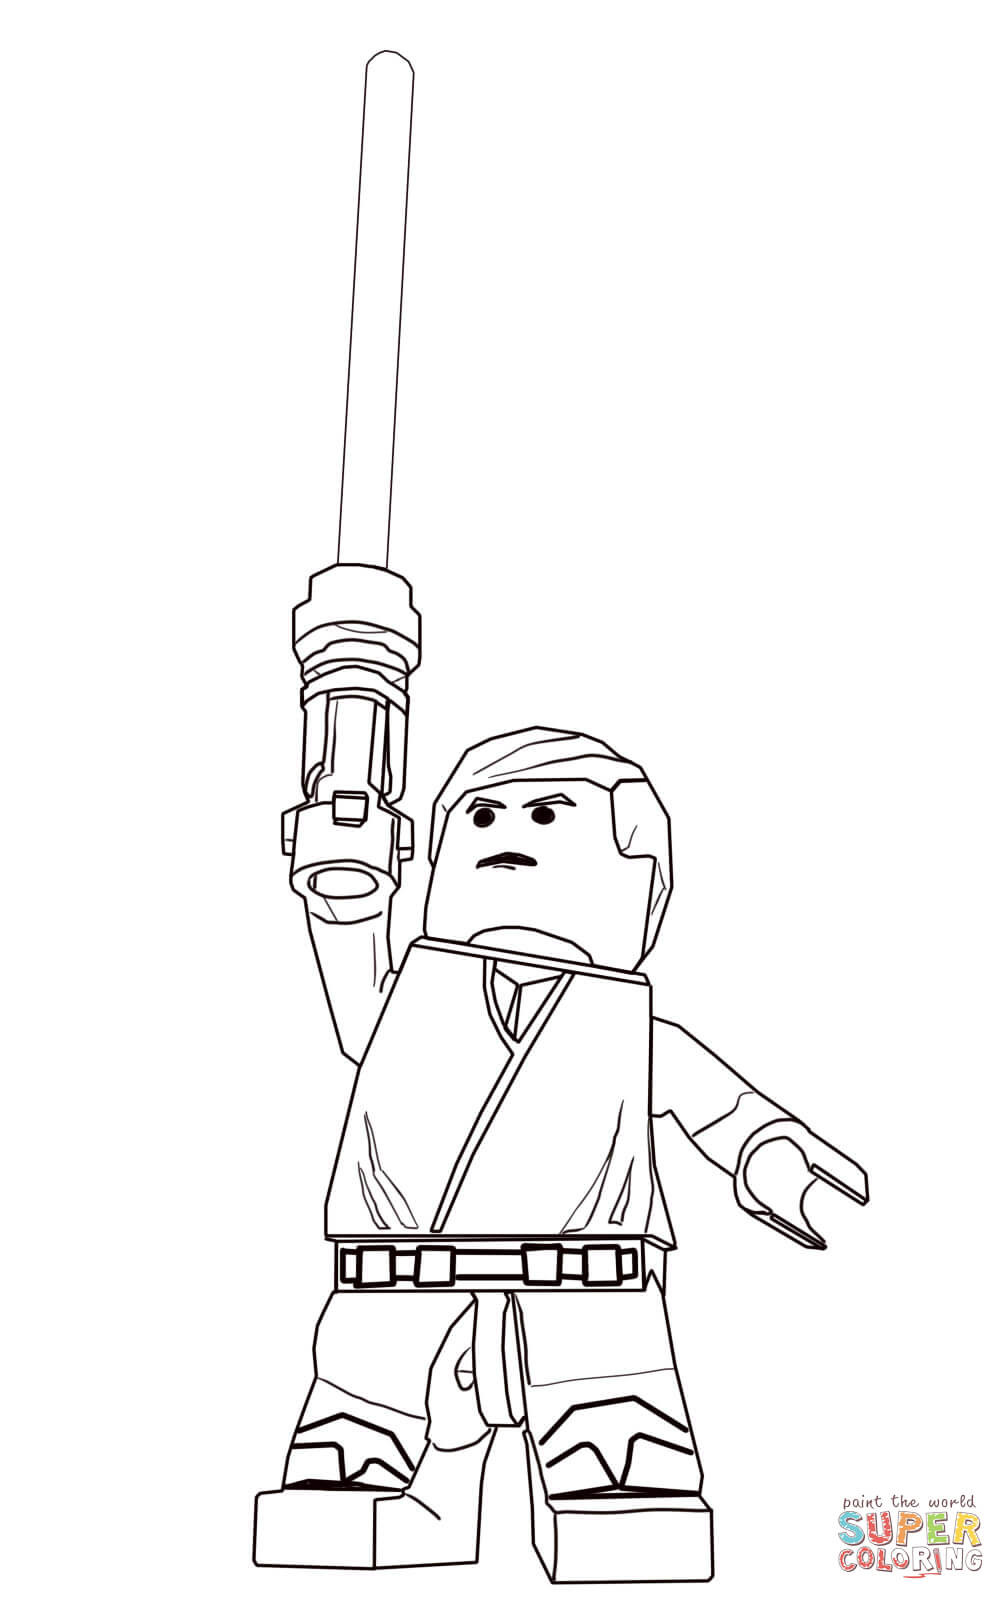 Lego Star Wars Printable Coloring Pages
 Lego Star Wars Luke Skywalker coloring page